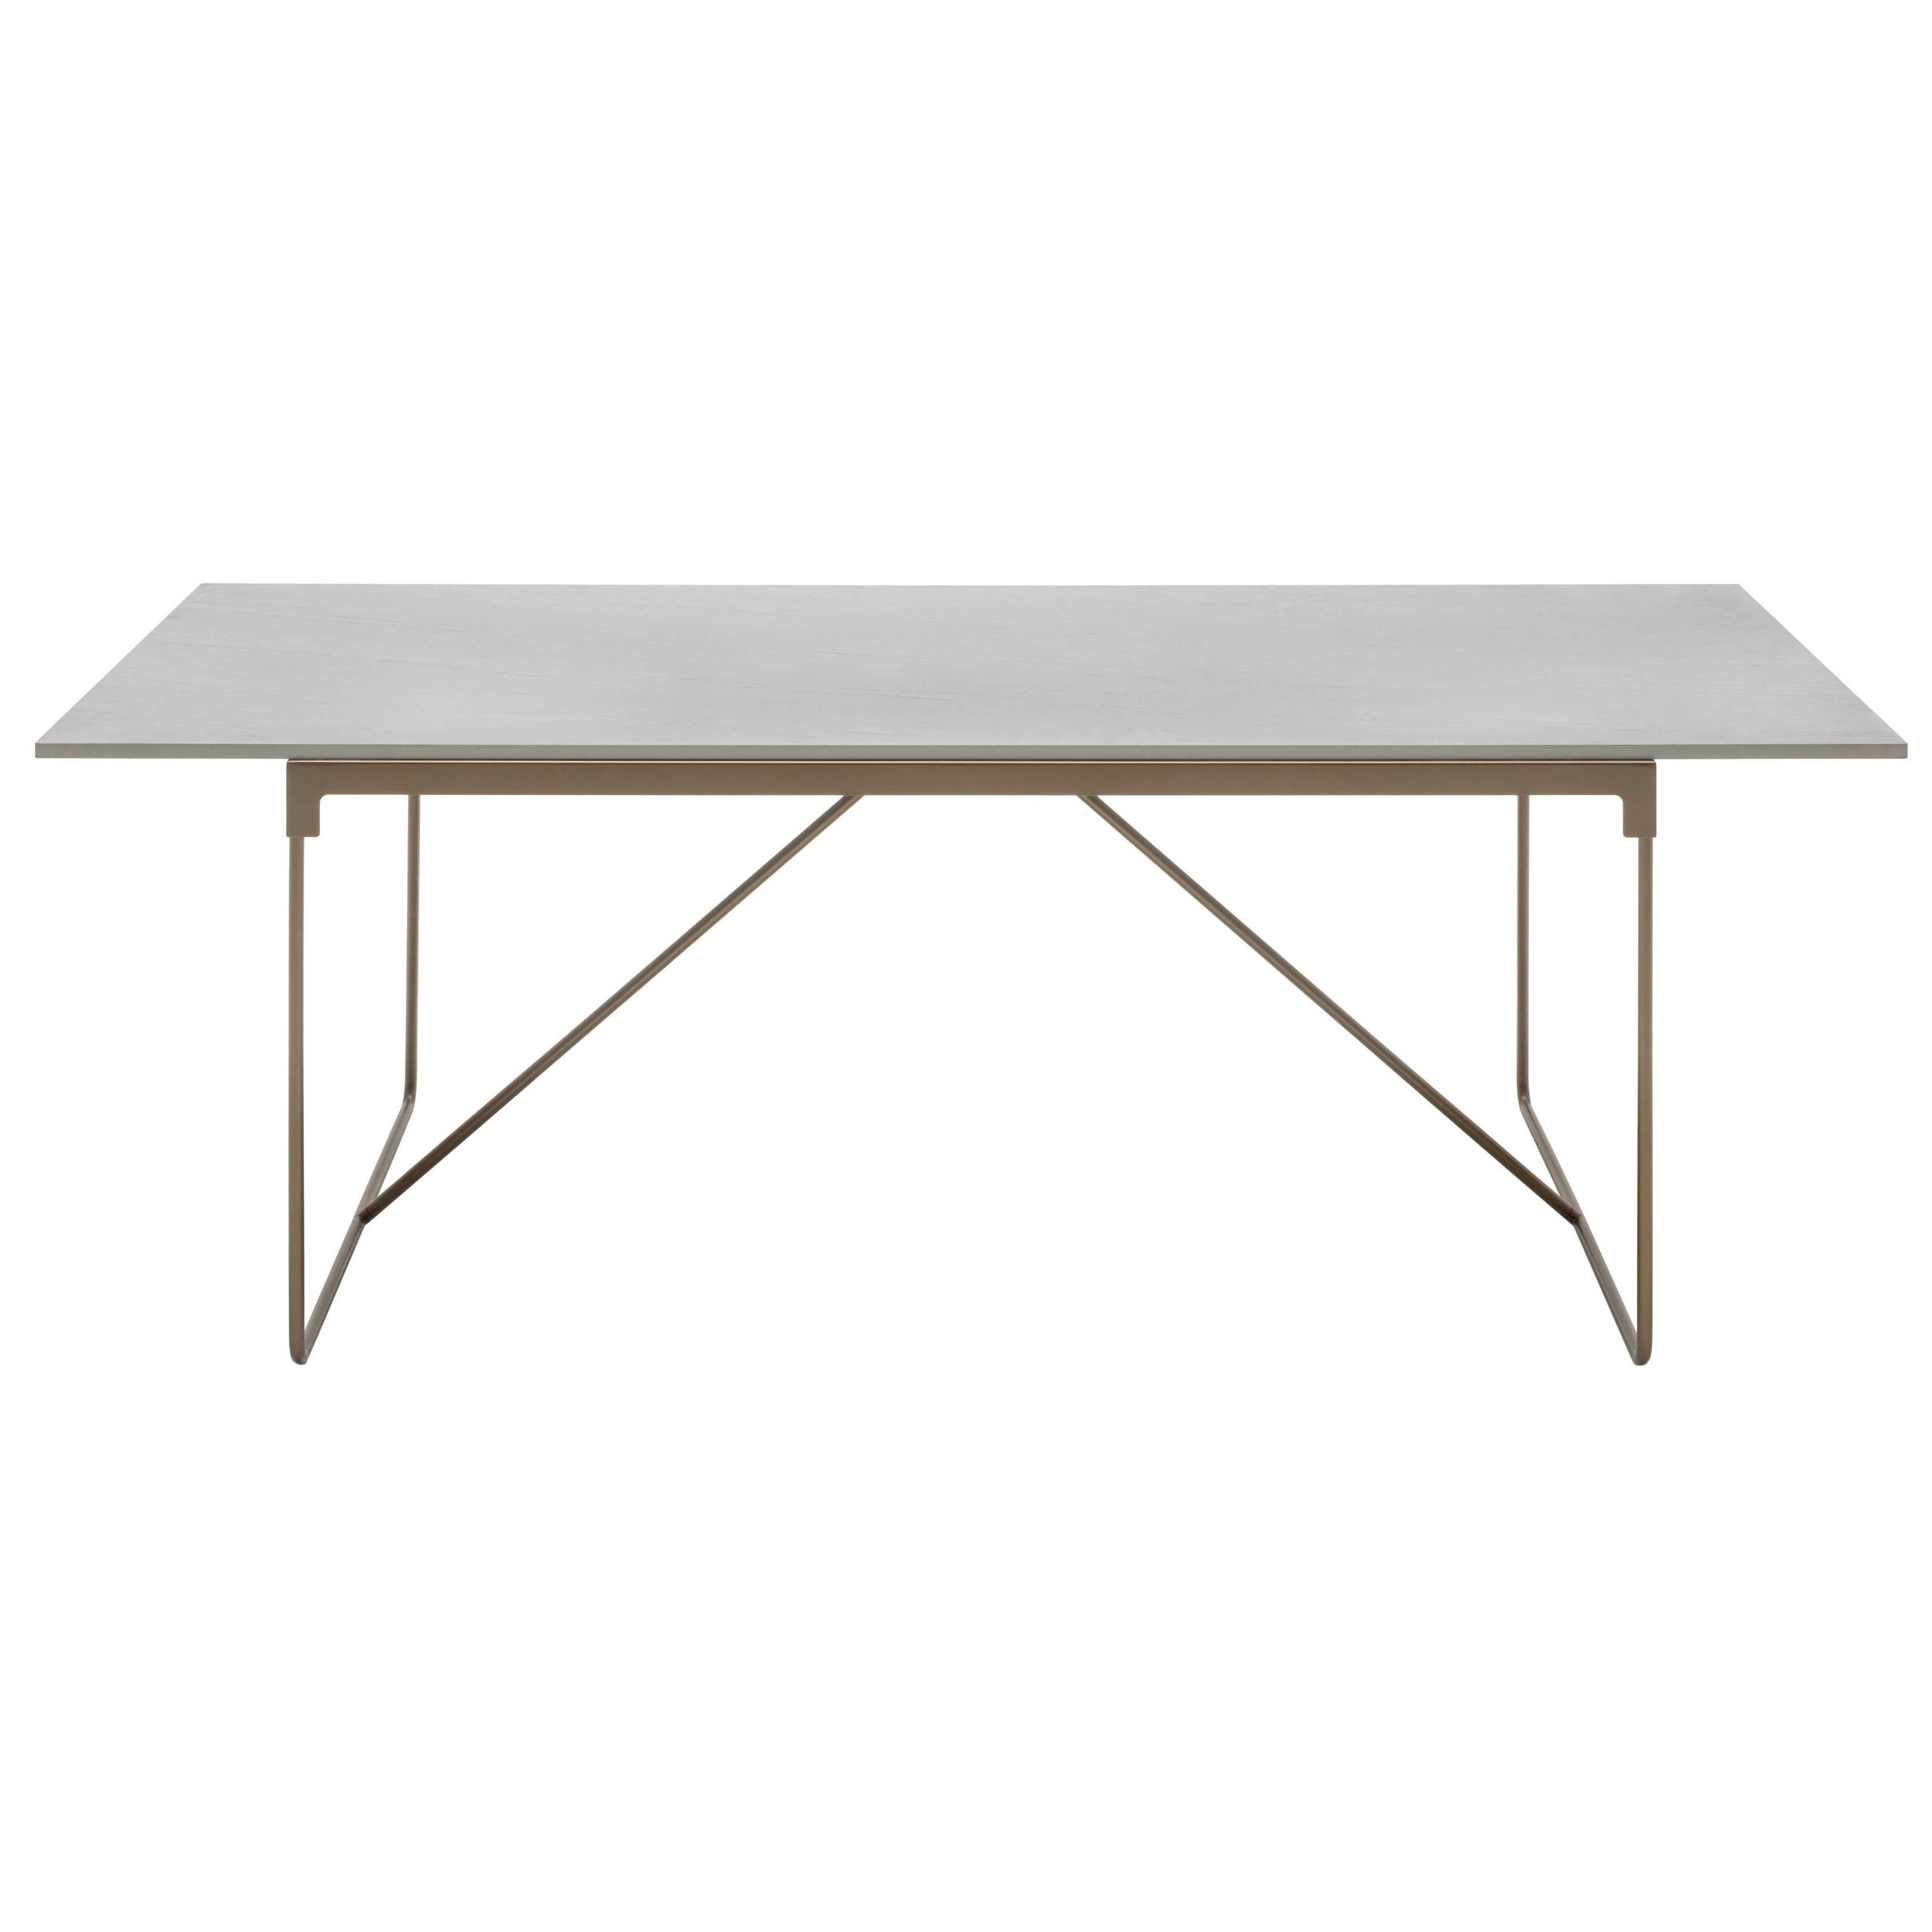 "Mingx" Outdoor Quartzite Top and Steel Table by Konstantin Grcic for Driade